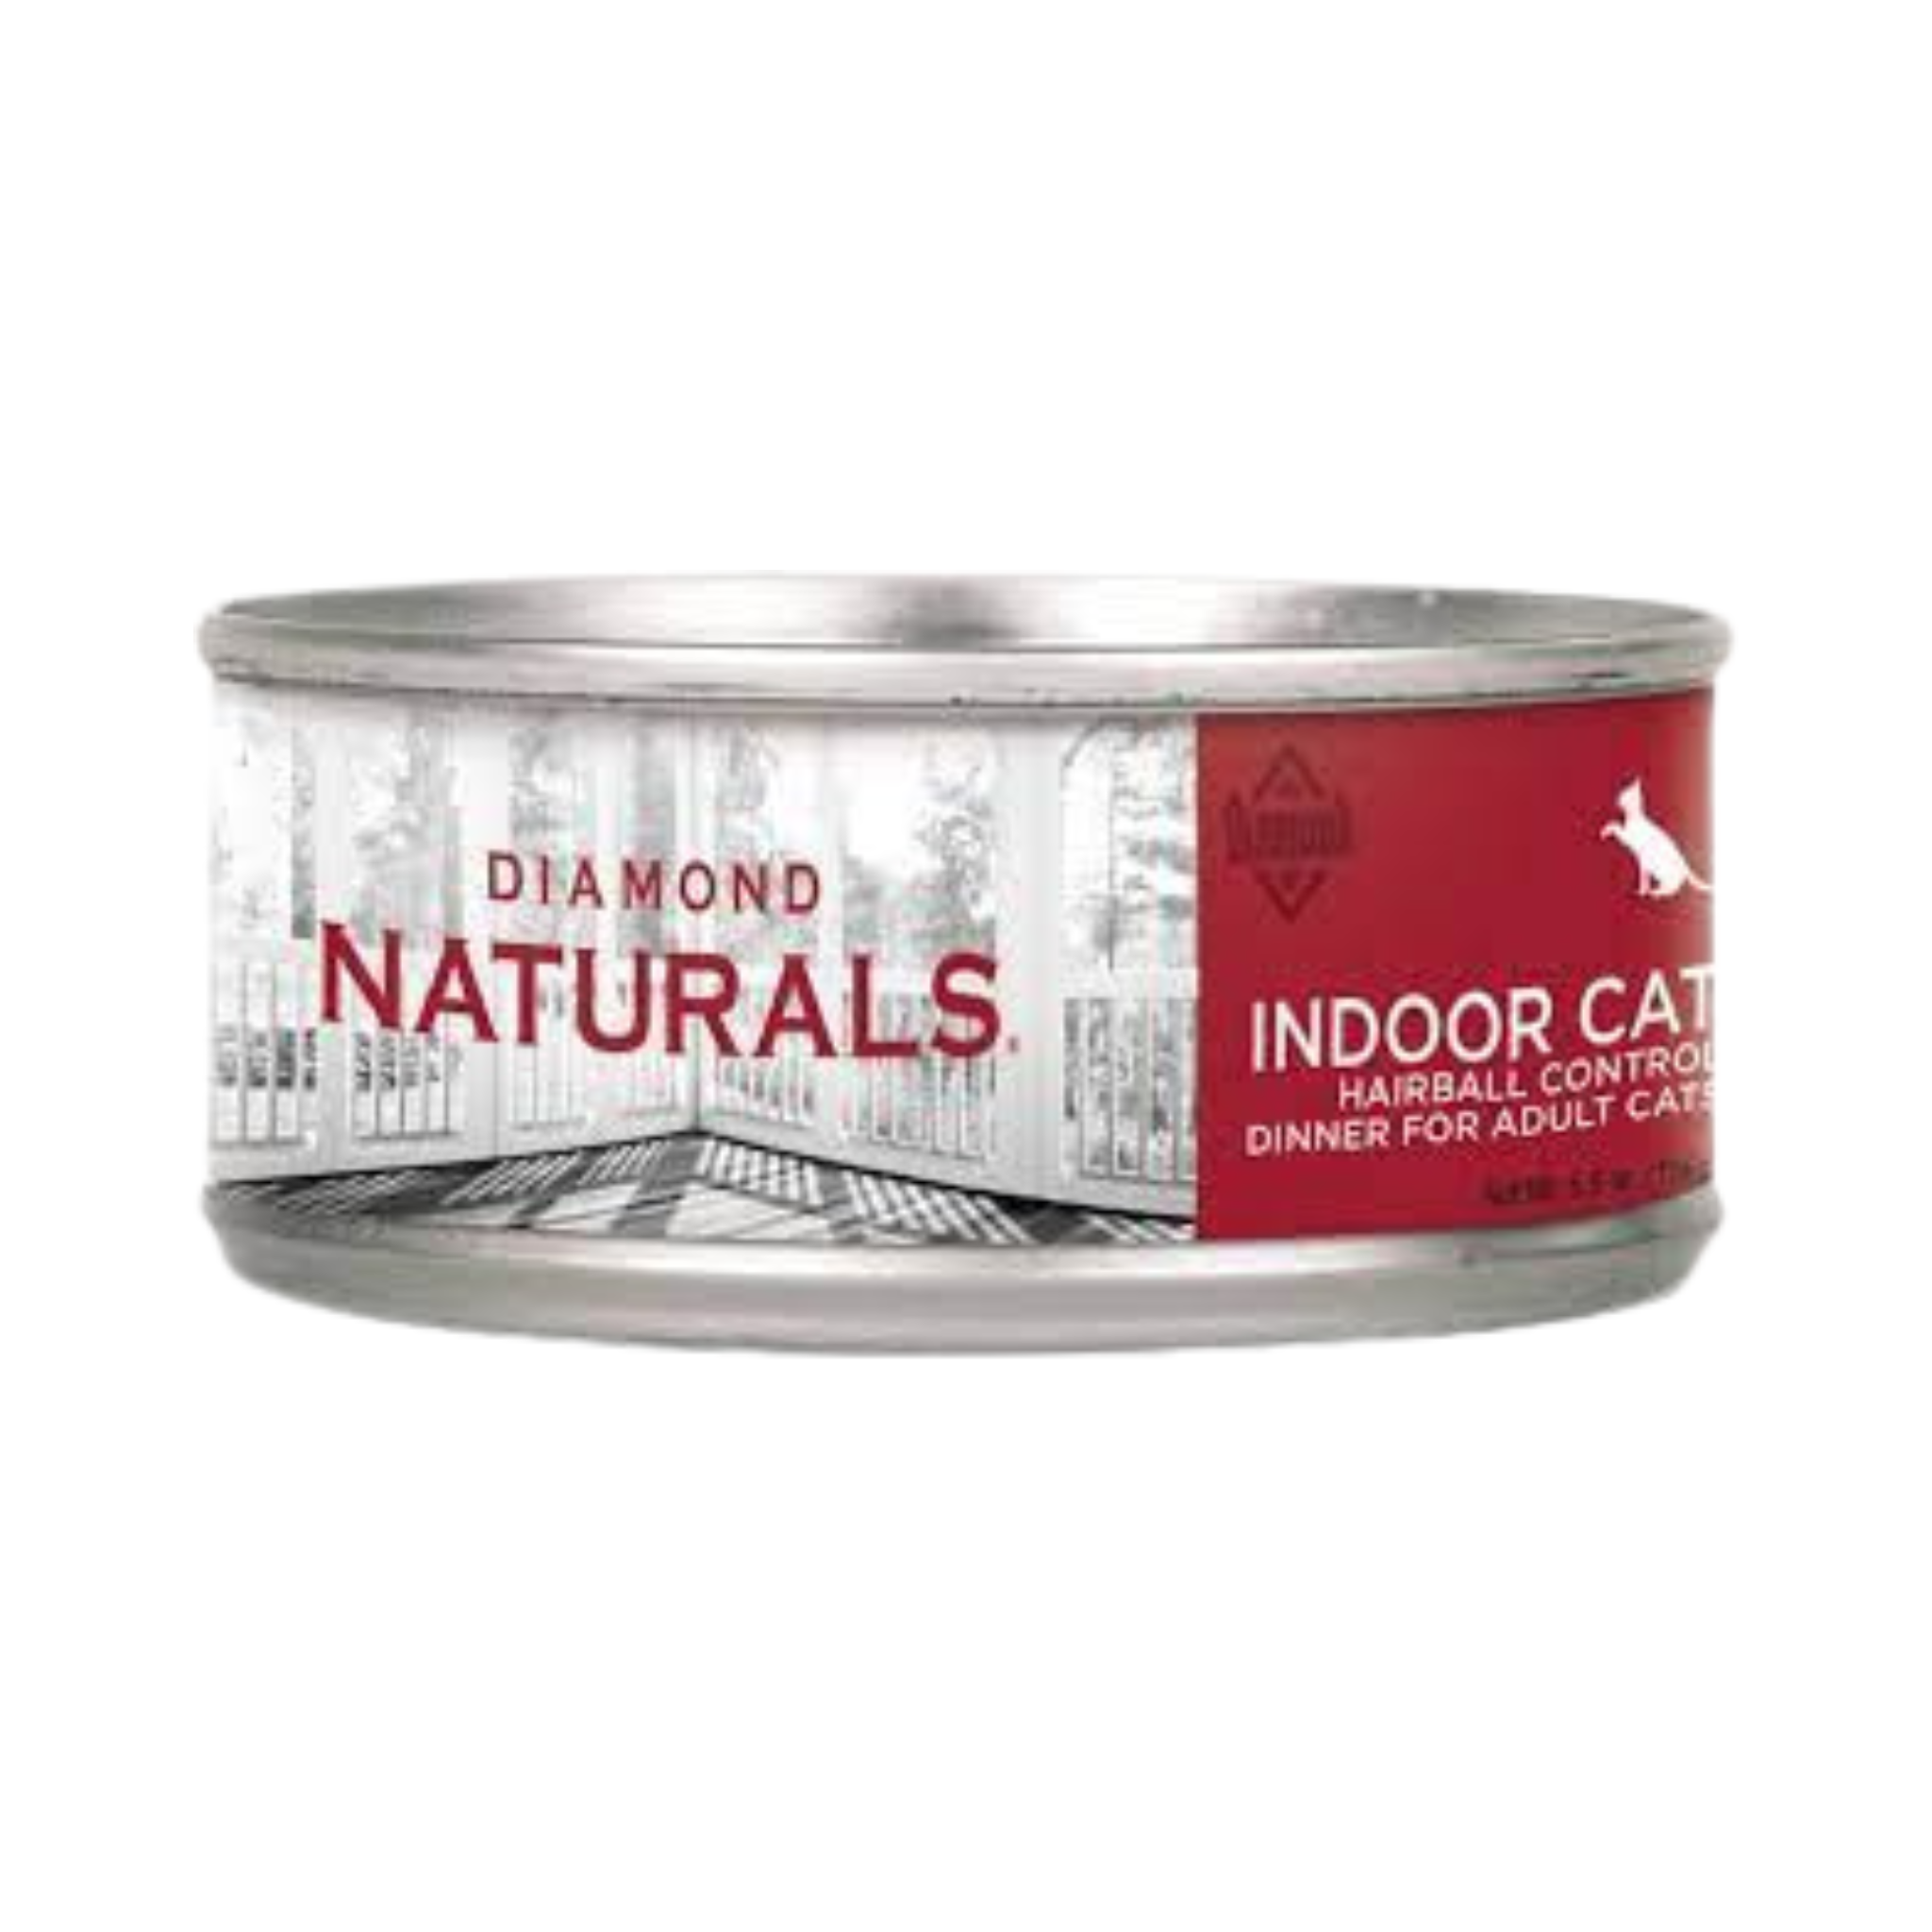 Diamond Naturals Indoor Hairball Cat Canned